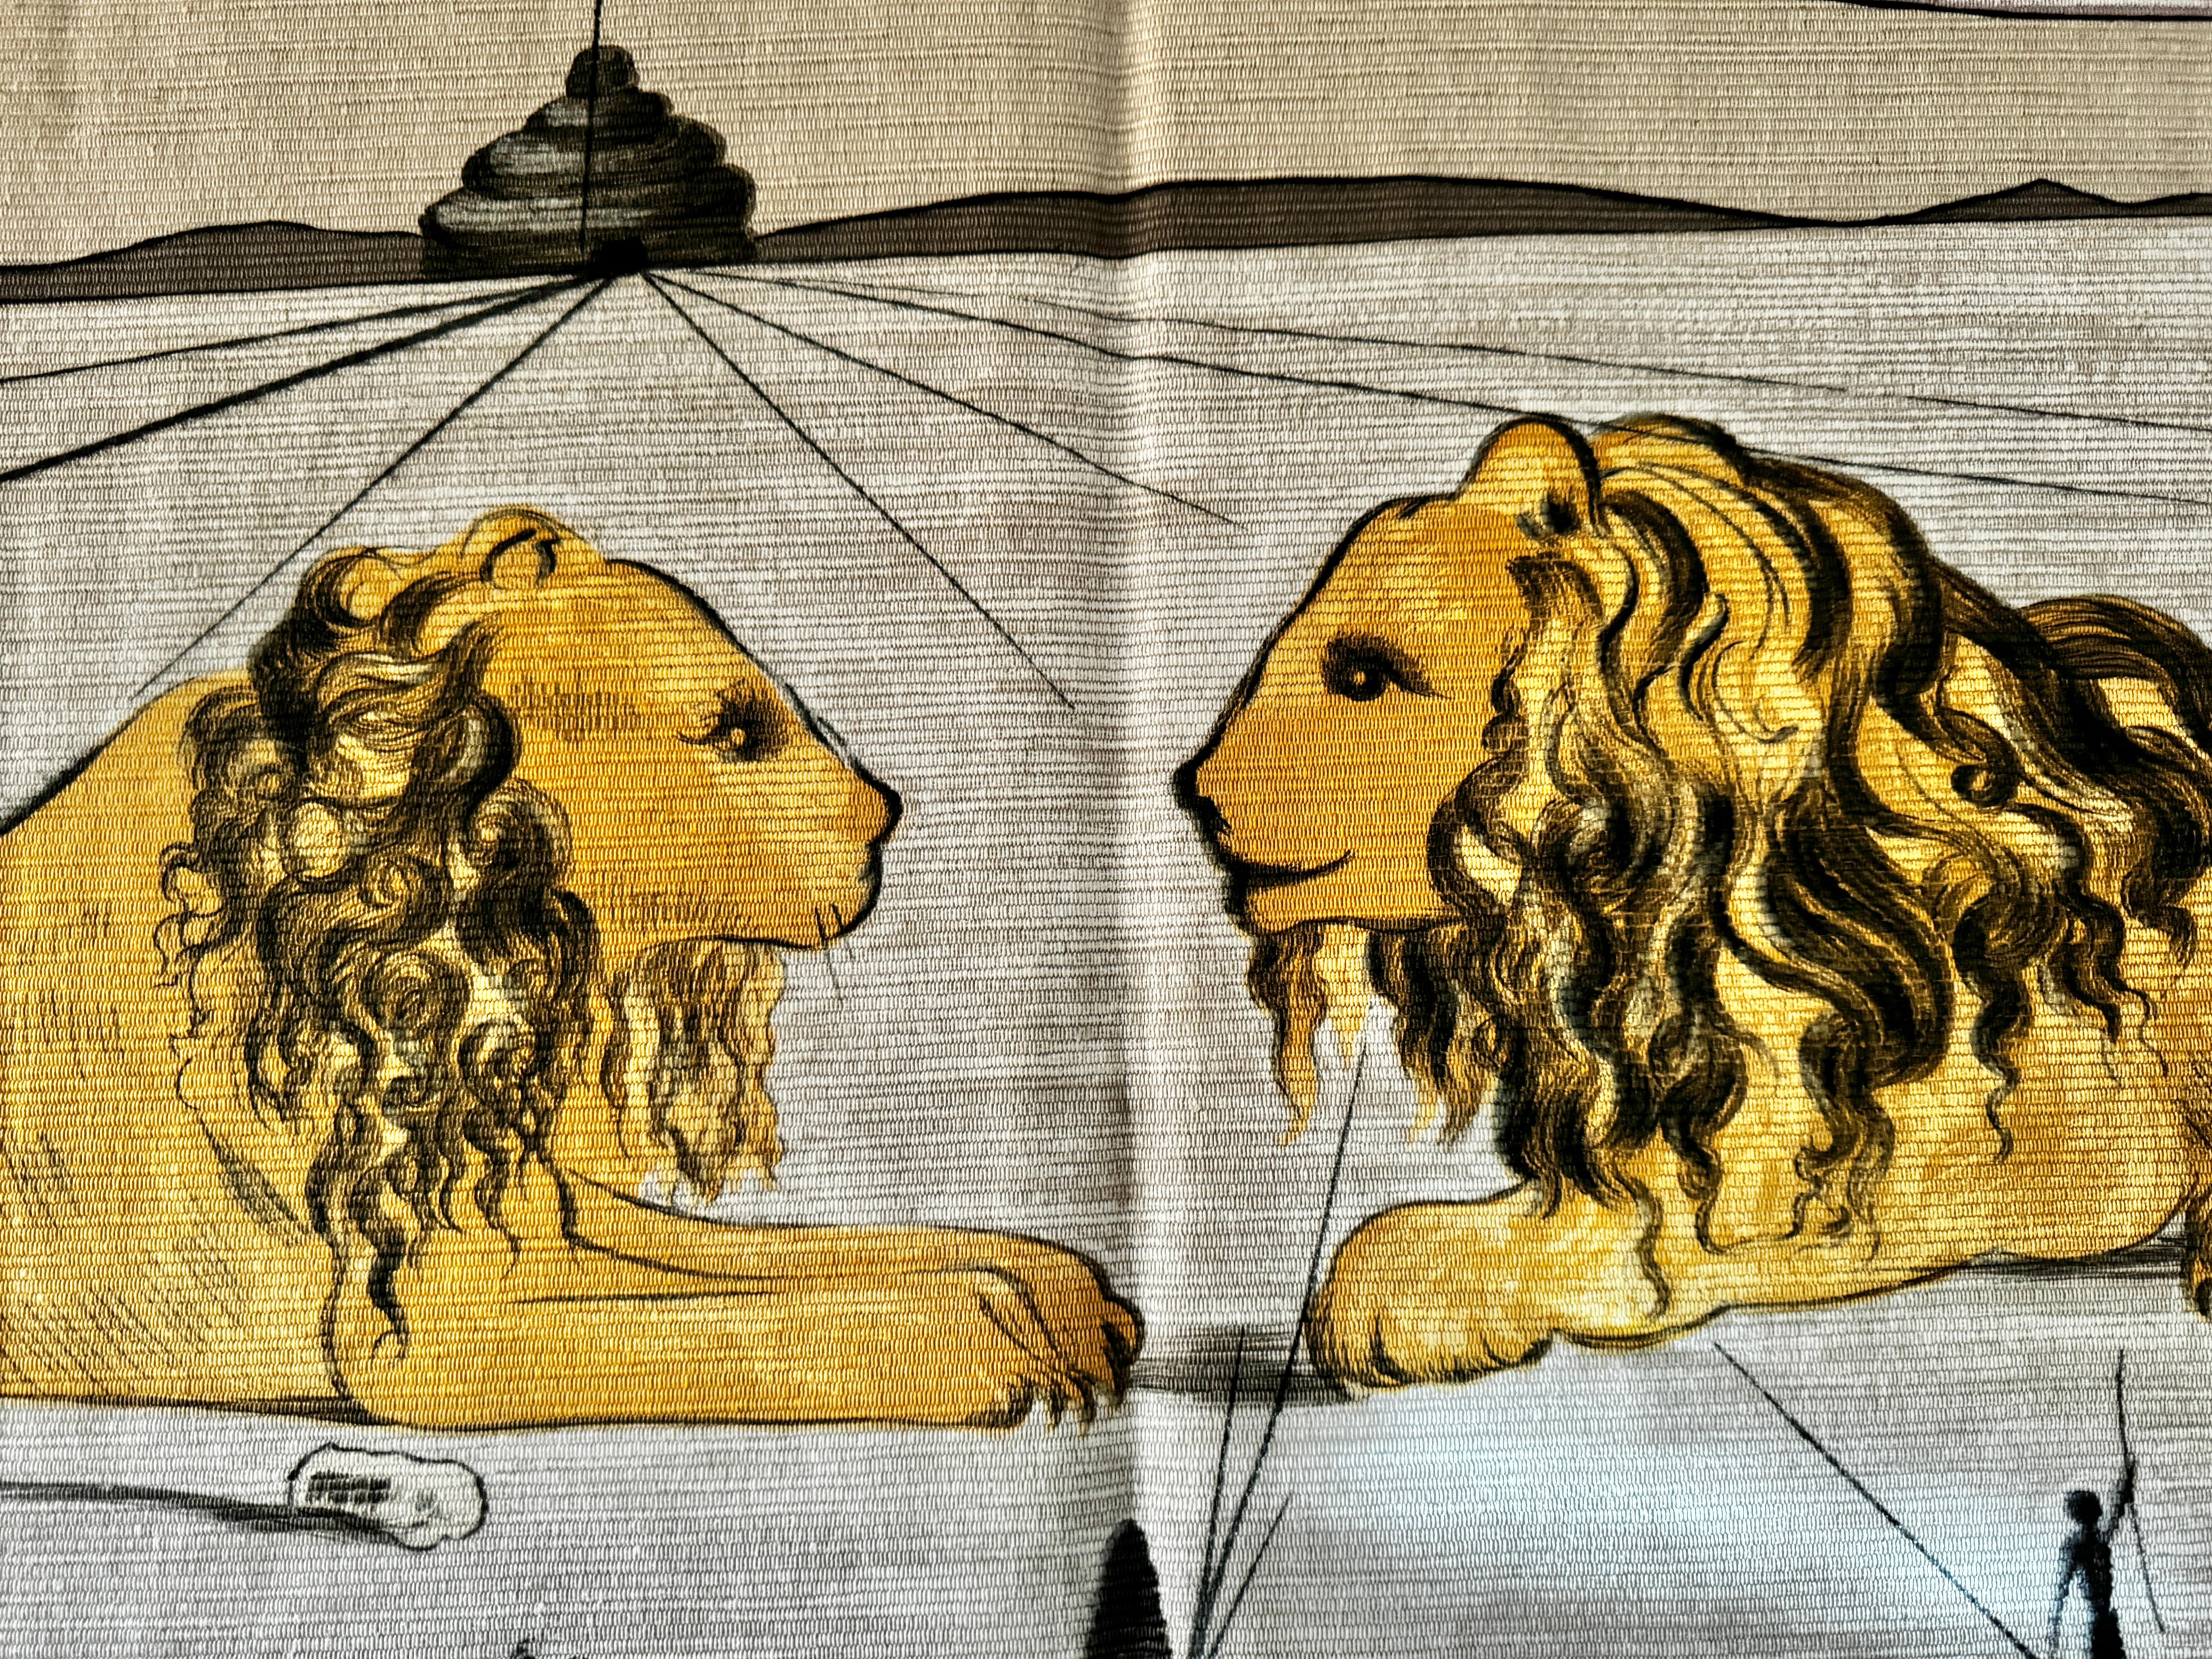 The Spanish artist’s extensive oeuvre not only includes watercolors, drawings and sculptures but also tapestries; here a fine example from the limited edition ‘The Twelve Tribes of Israel’
The tapestry was created after an etching by Salvador Dalí